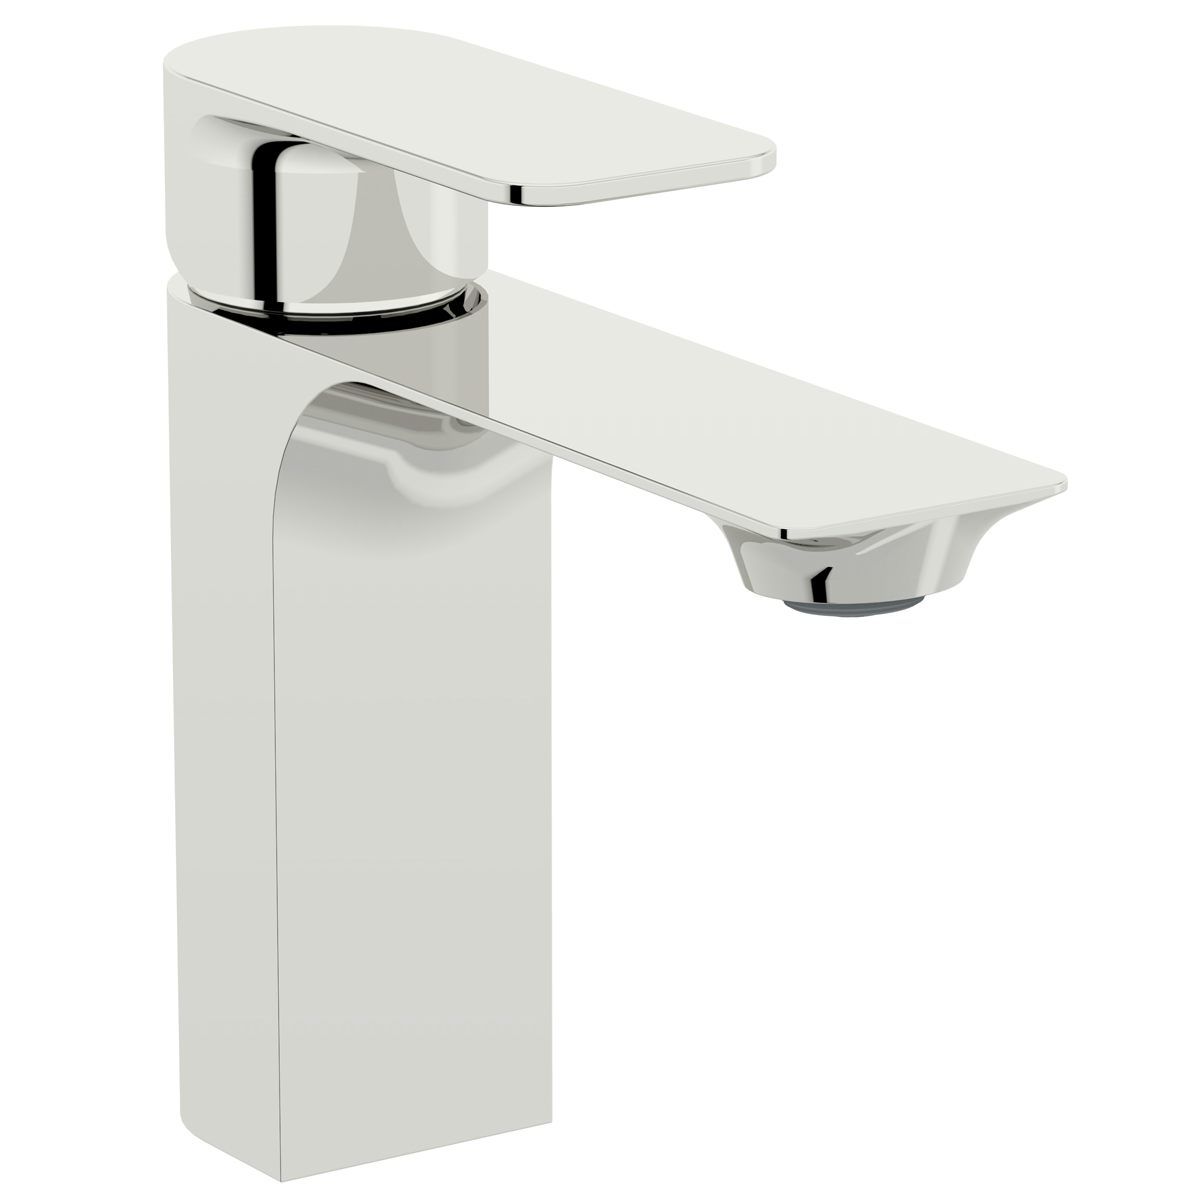 Mode Adler basin mixer tap with unslotted waste